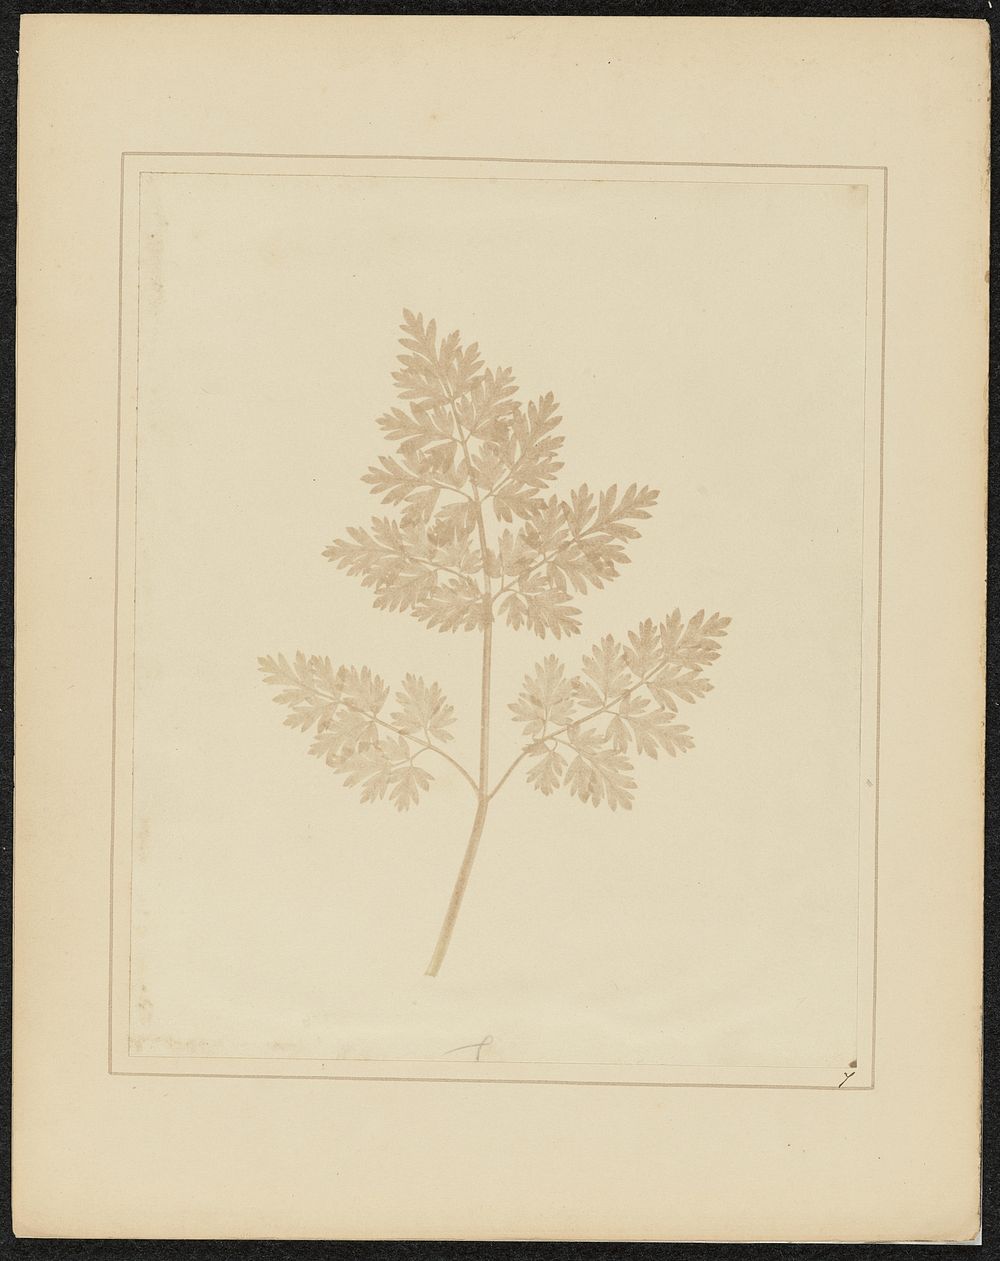 Leaf of a Plant by William Henry Fox Talbot